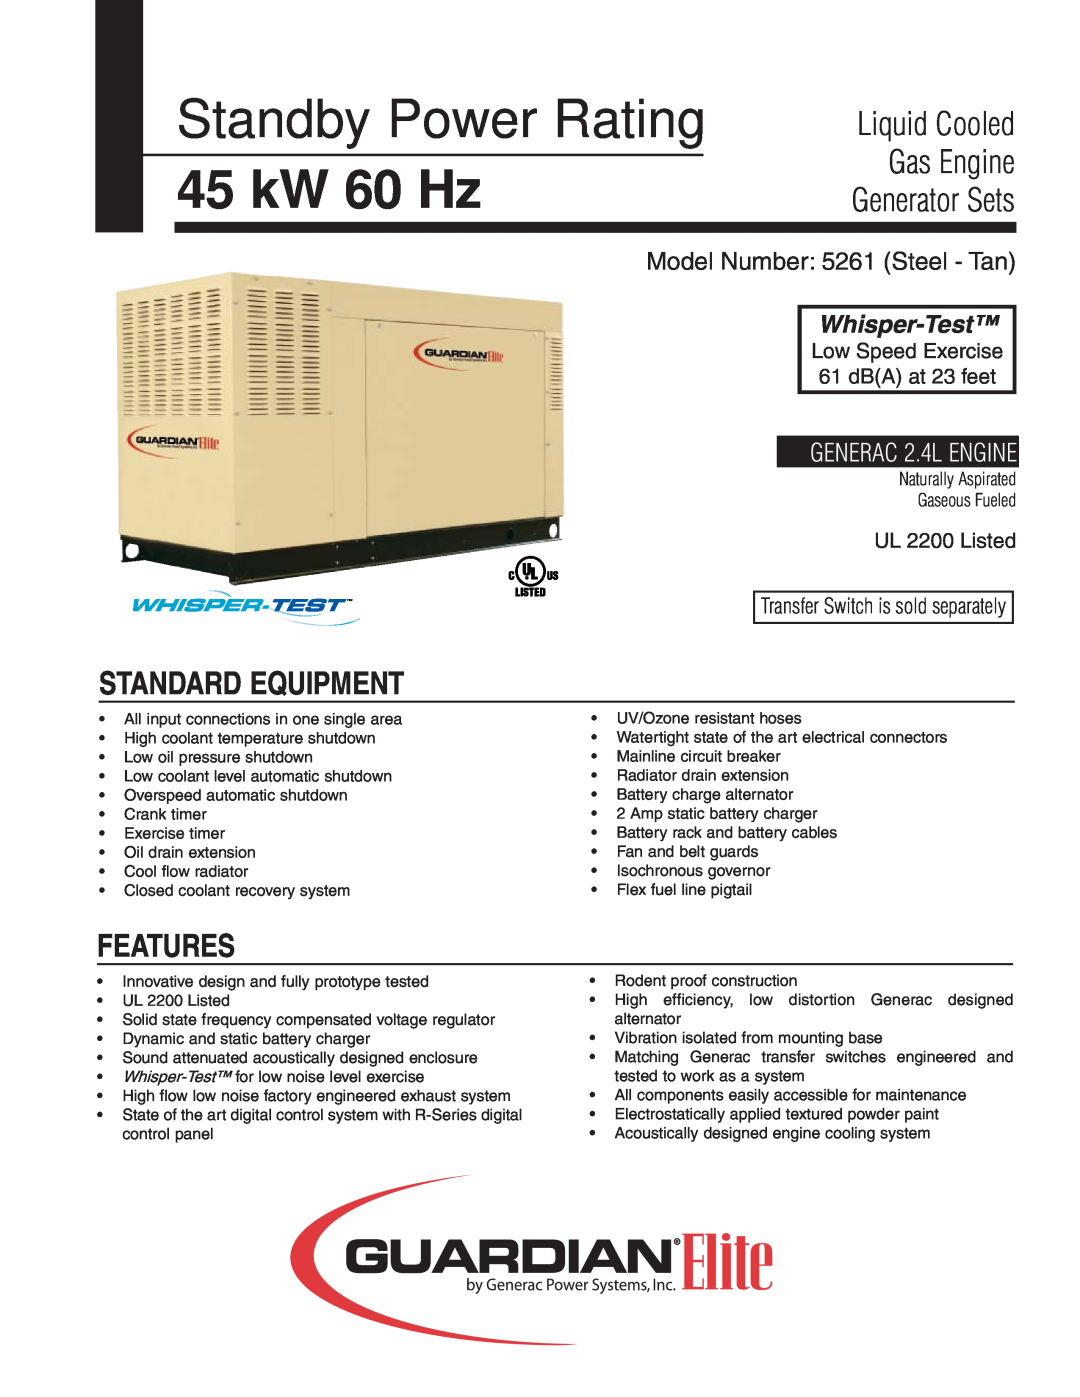 Generac Power Systems 5261 manual Standby Power Rating, 45 kW 60 Hz, Liquid Cooled, Generator Sets, Gas Engine 